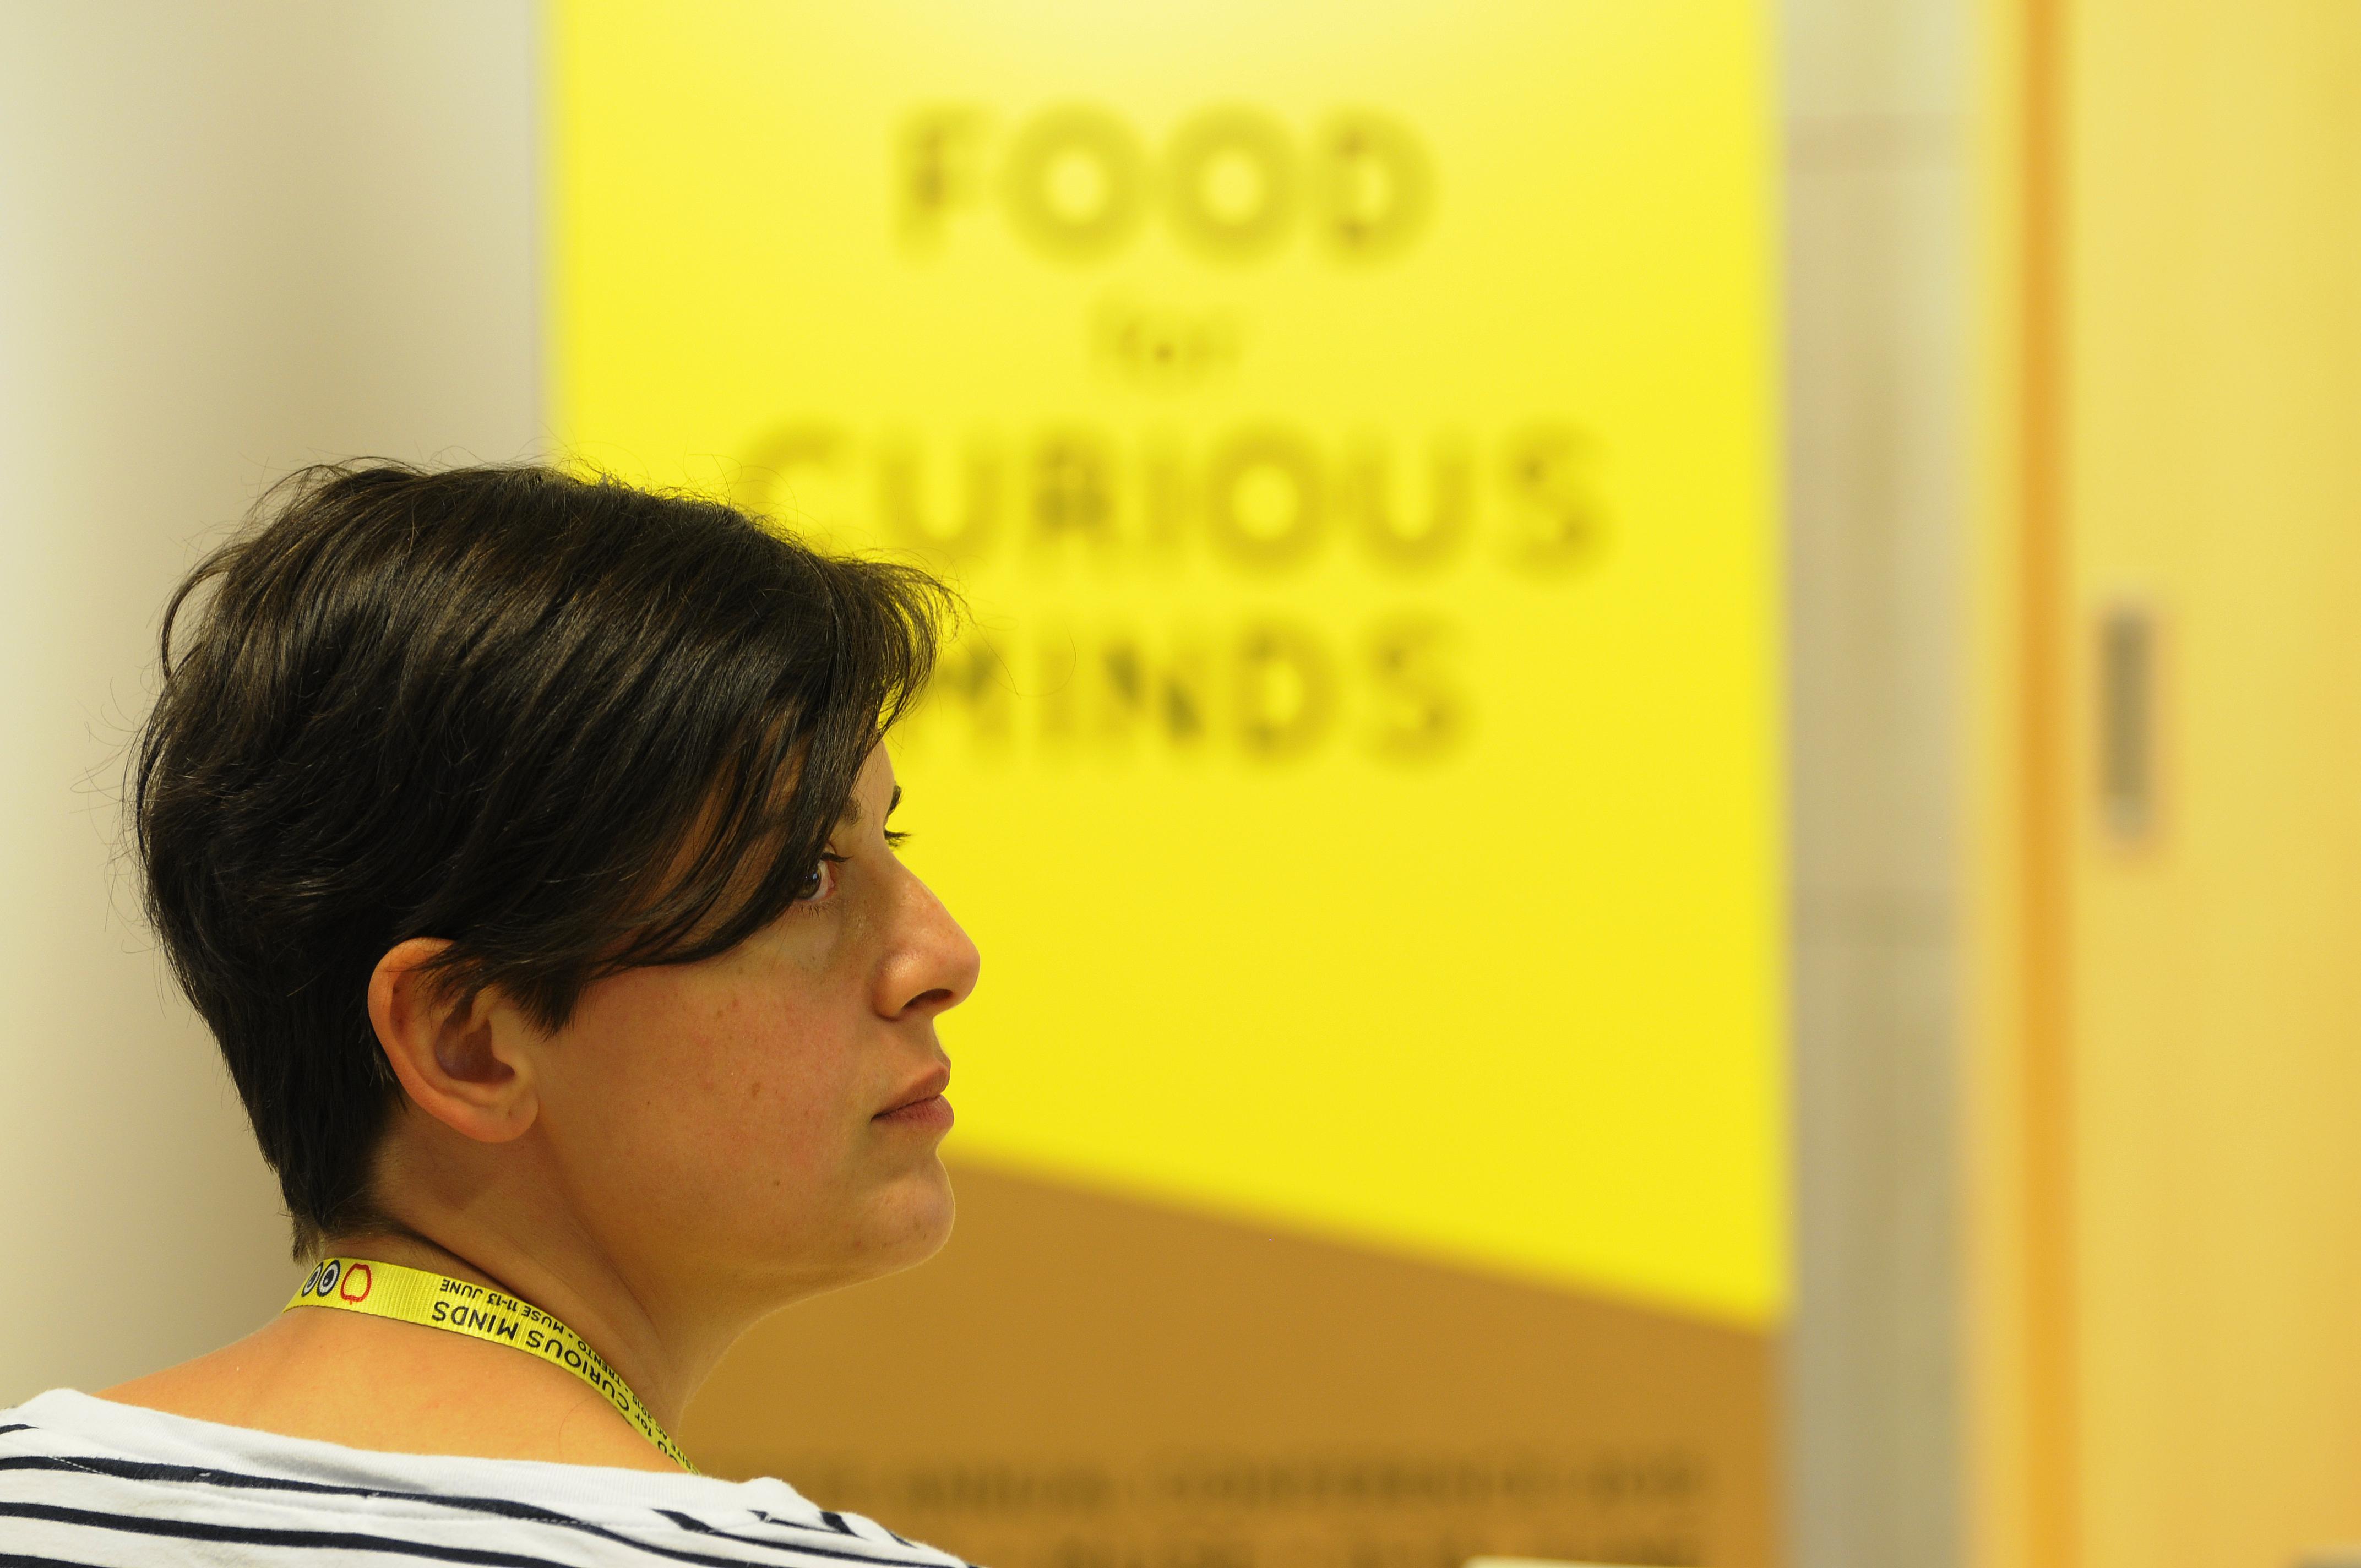 #Ecsite2015 - Food for curious minds